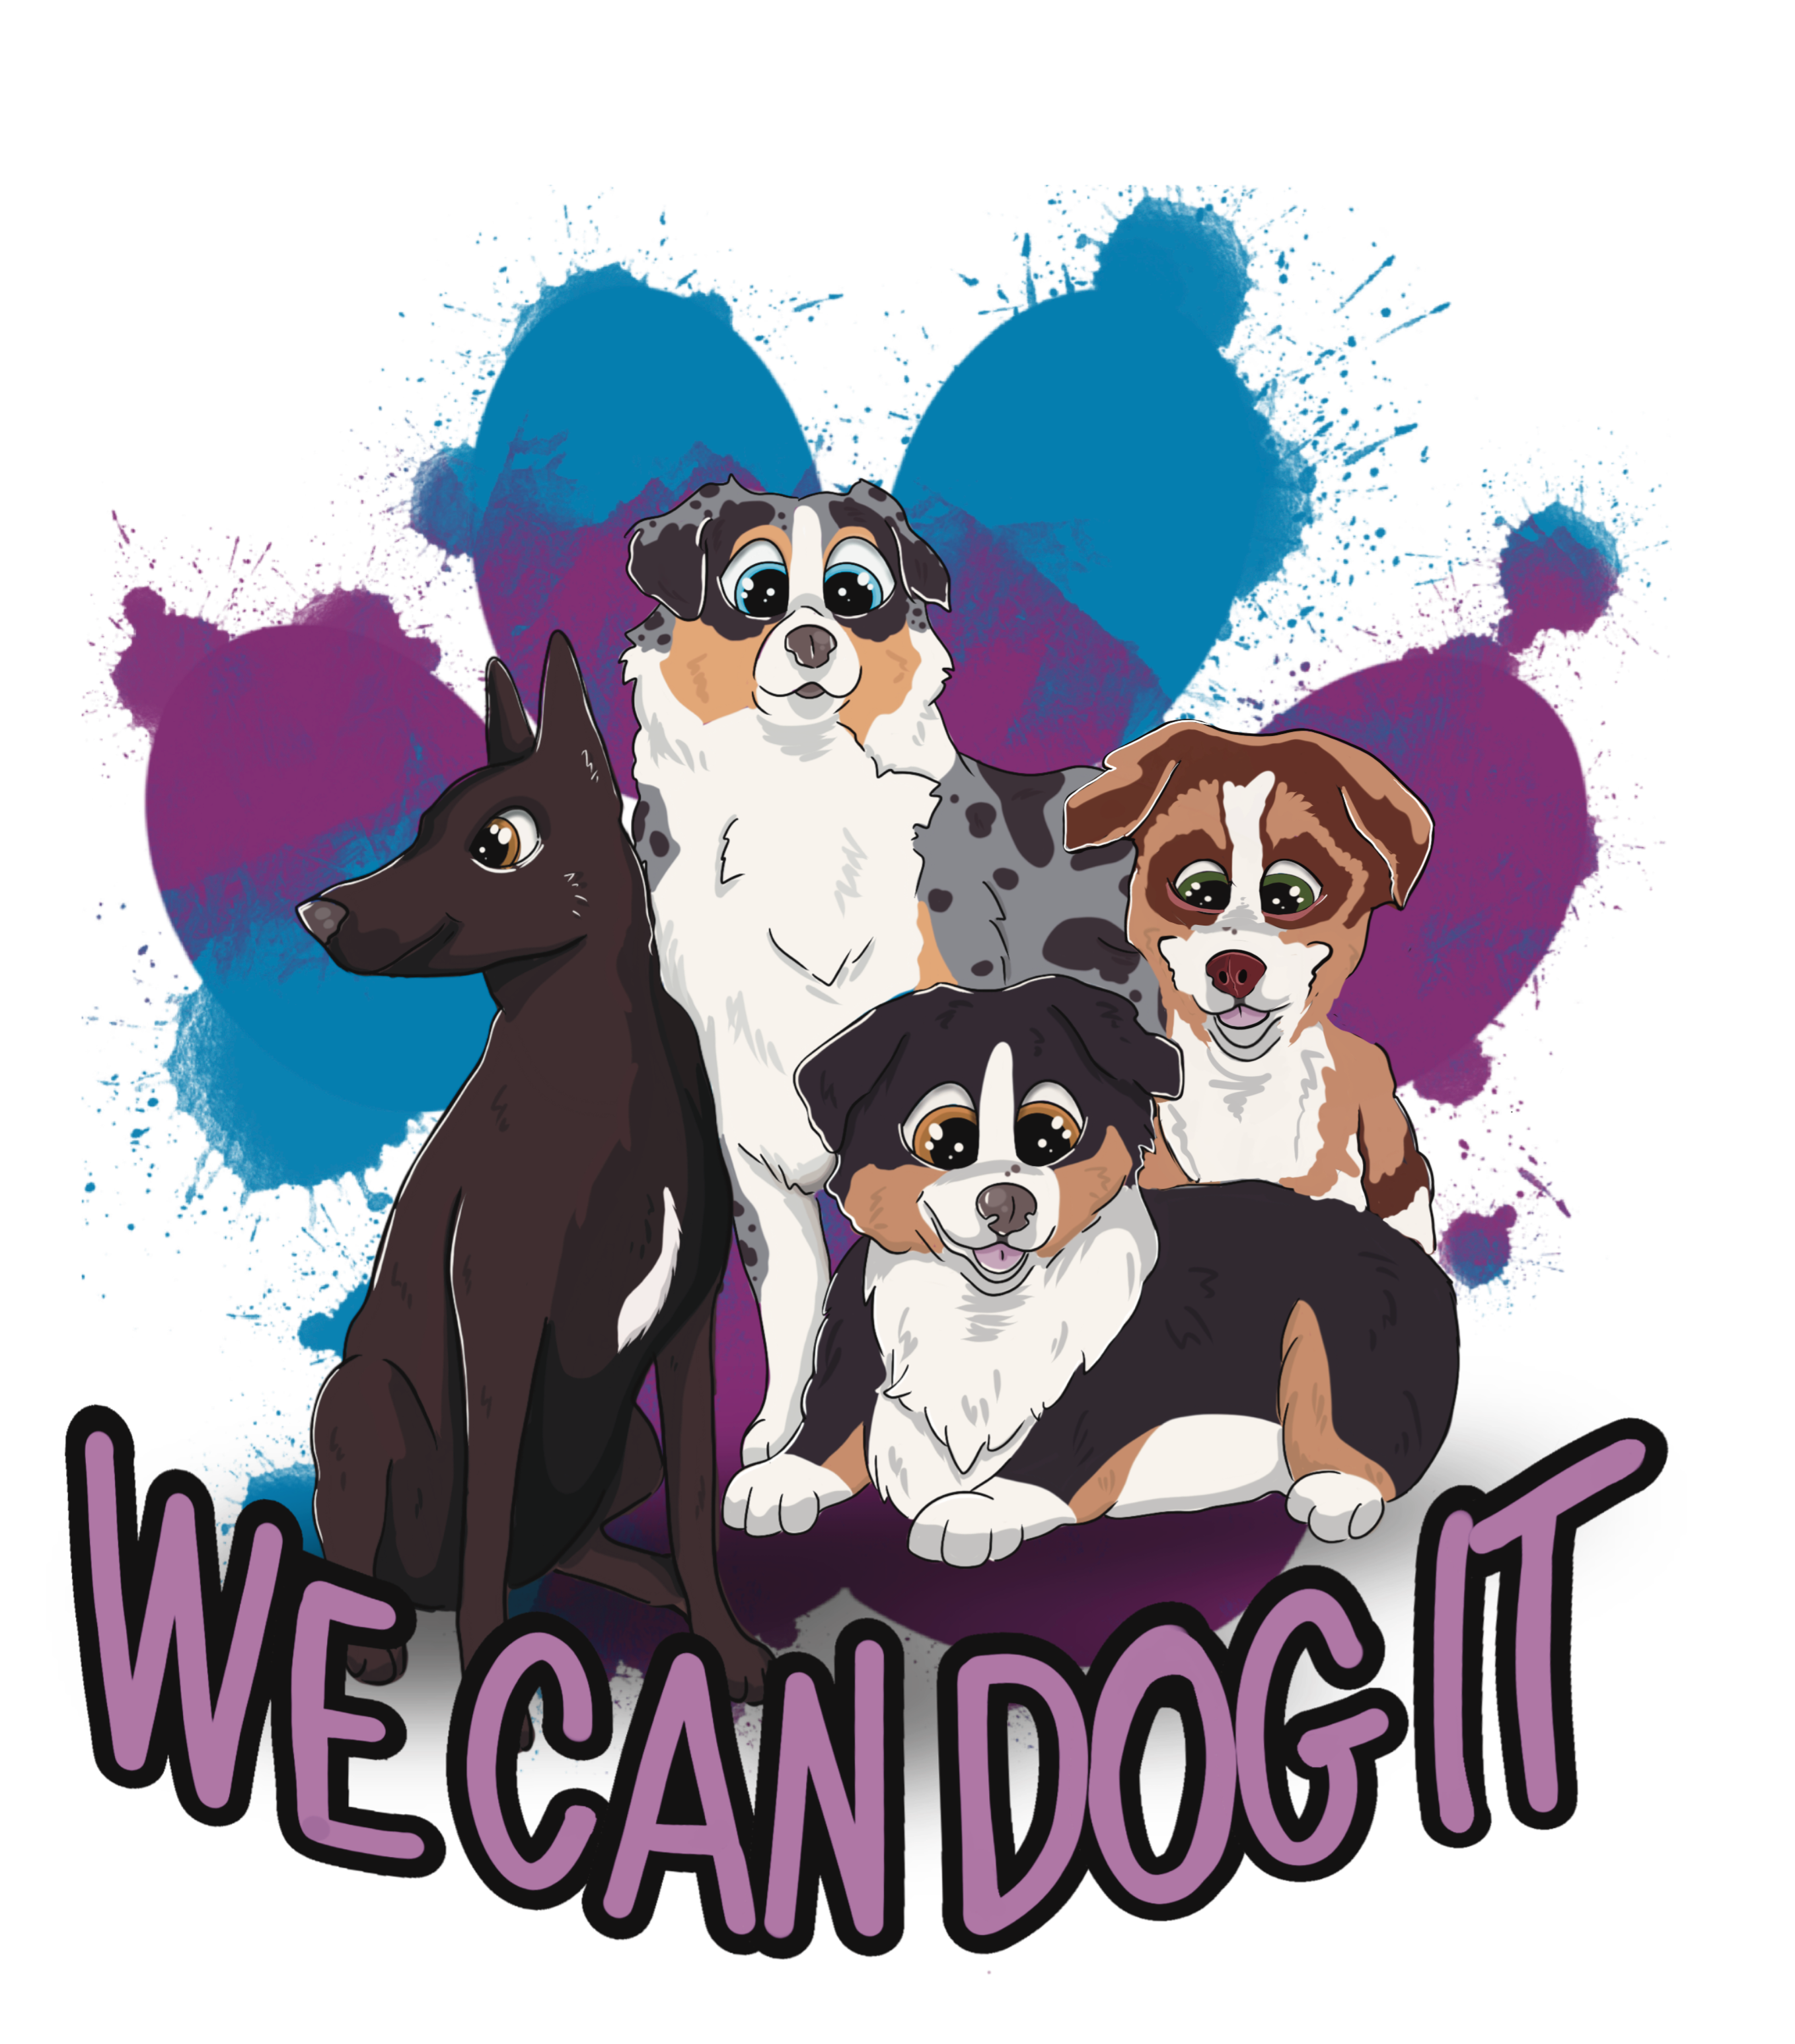 we can dog it